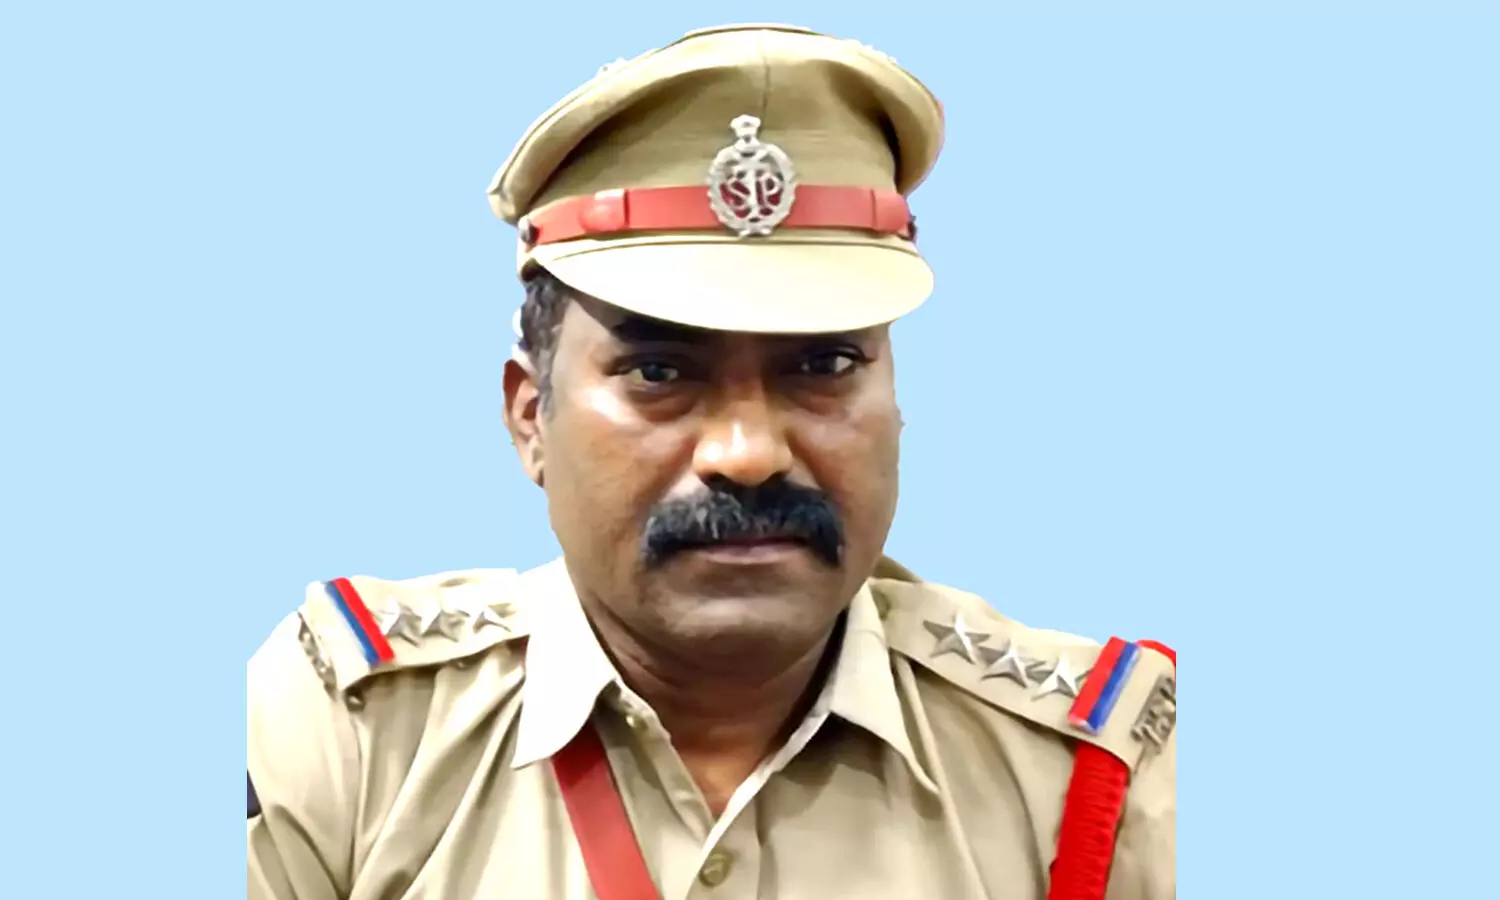 Banjara Hills inspector caught by ACB for taking Rs. 3 lakh bribe from pub owner in Hyderabad